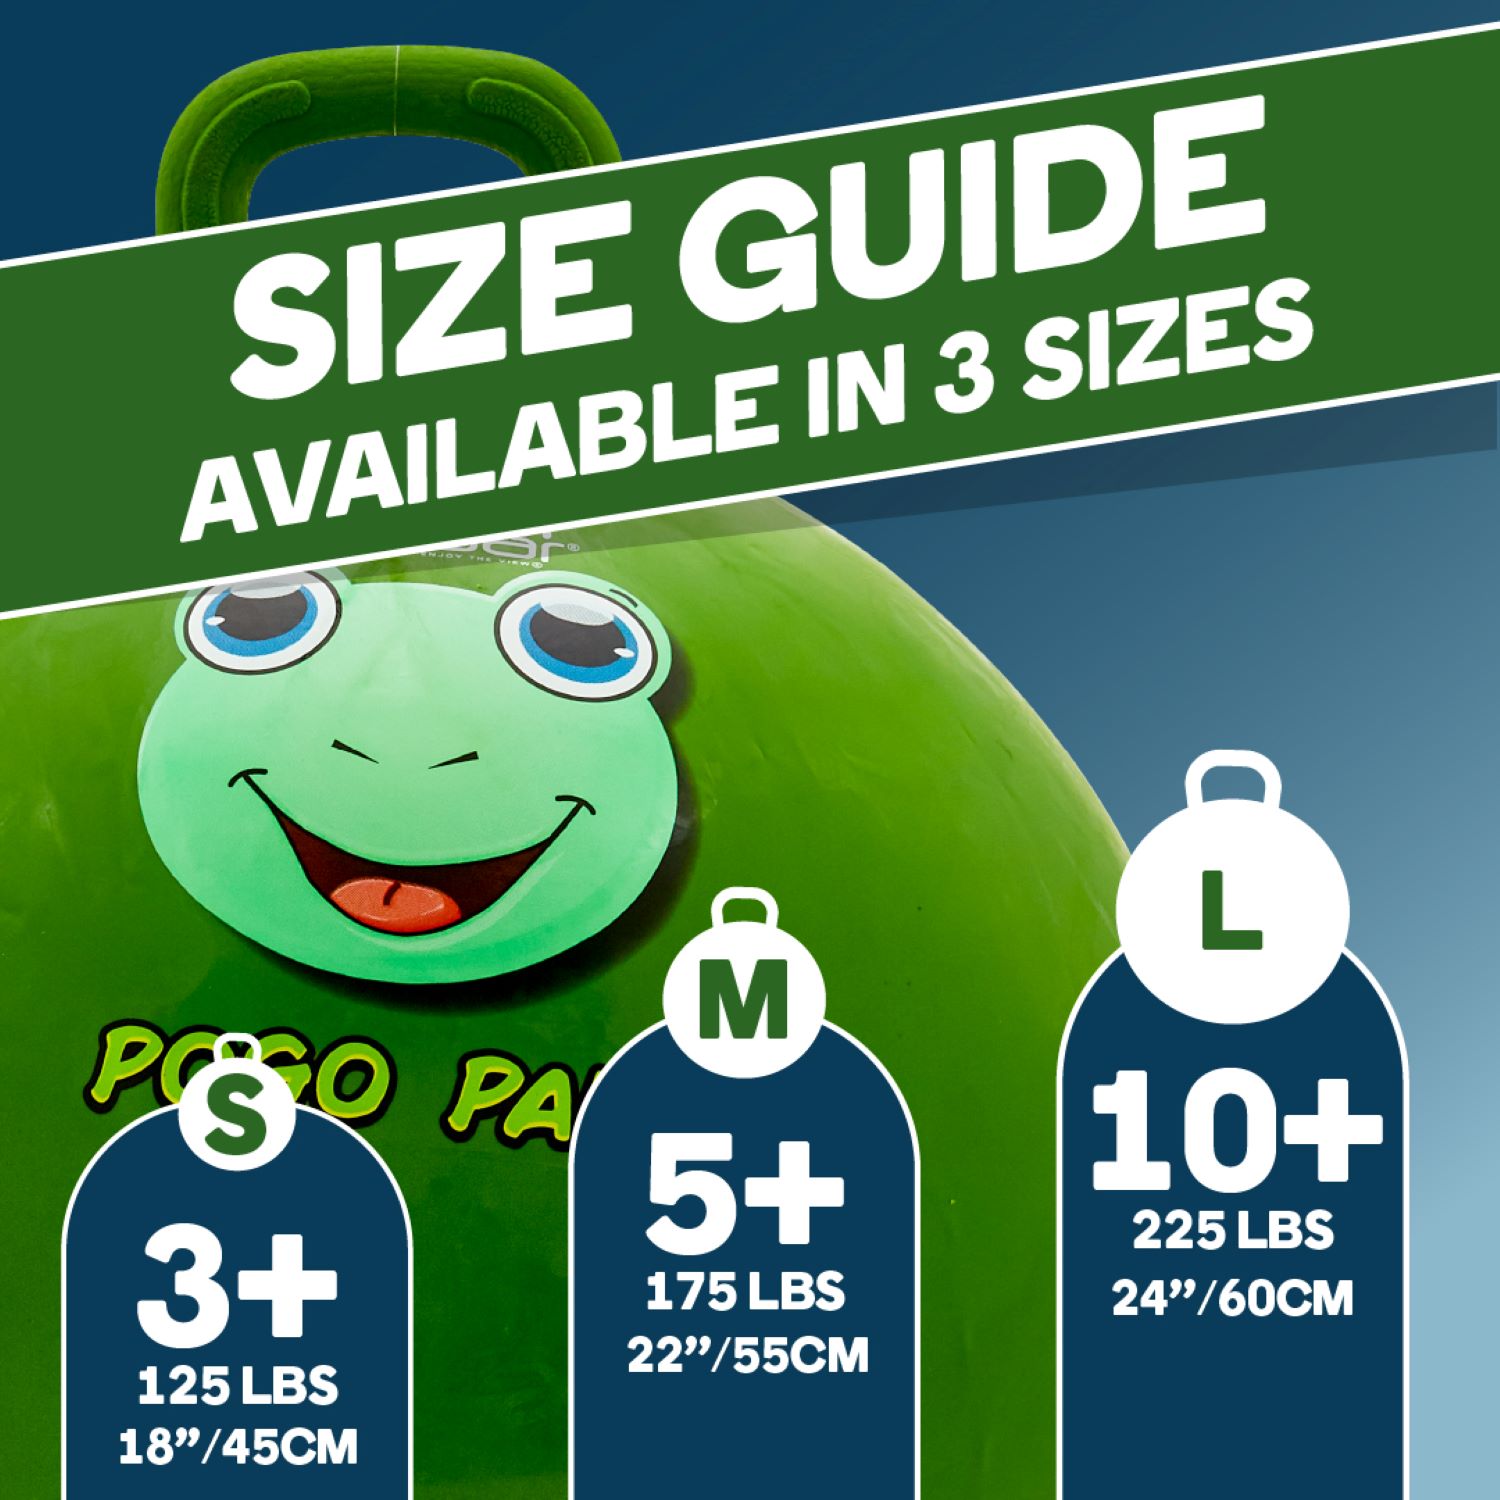 Flybar Hopper Ball for Kids - Bouncy Ball with Handle, Durable Bouncy Balls, 125lbs, Ages 3+, Green Frog, M - image 4 of 6